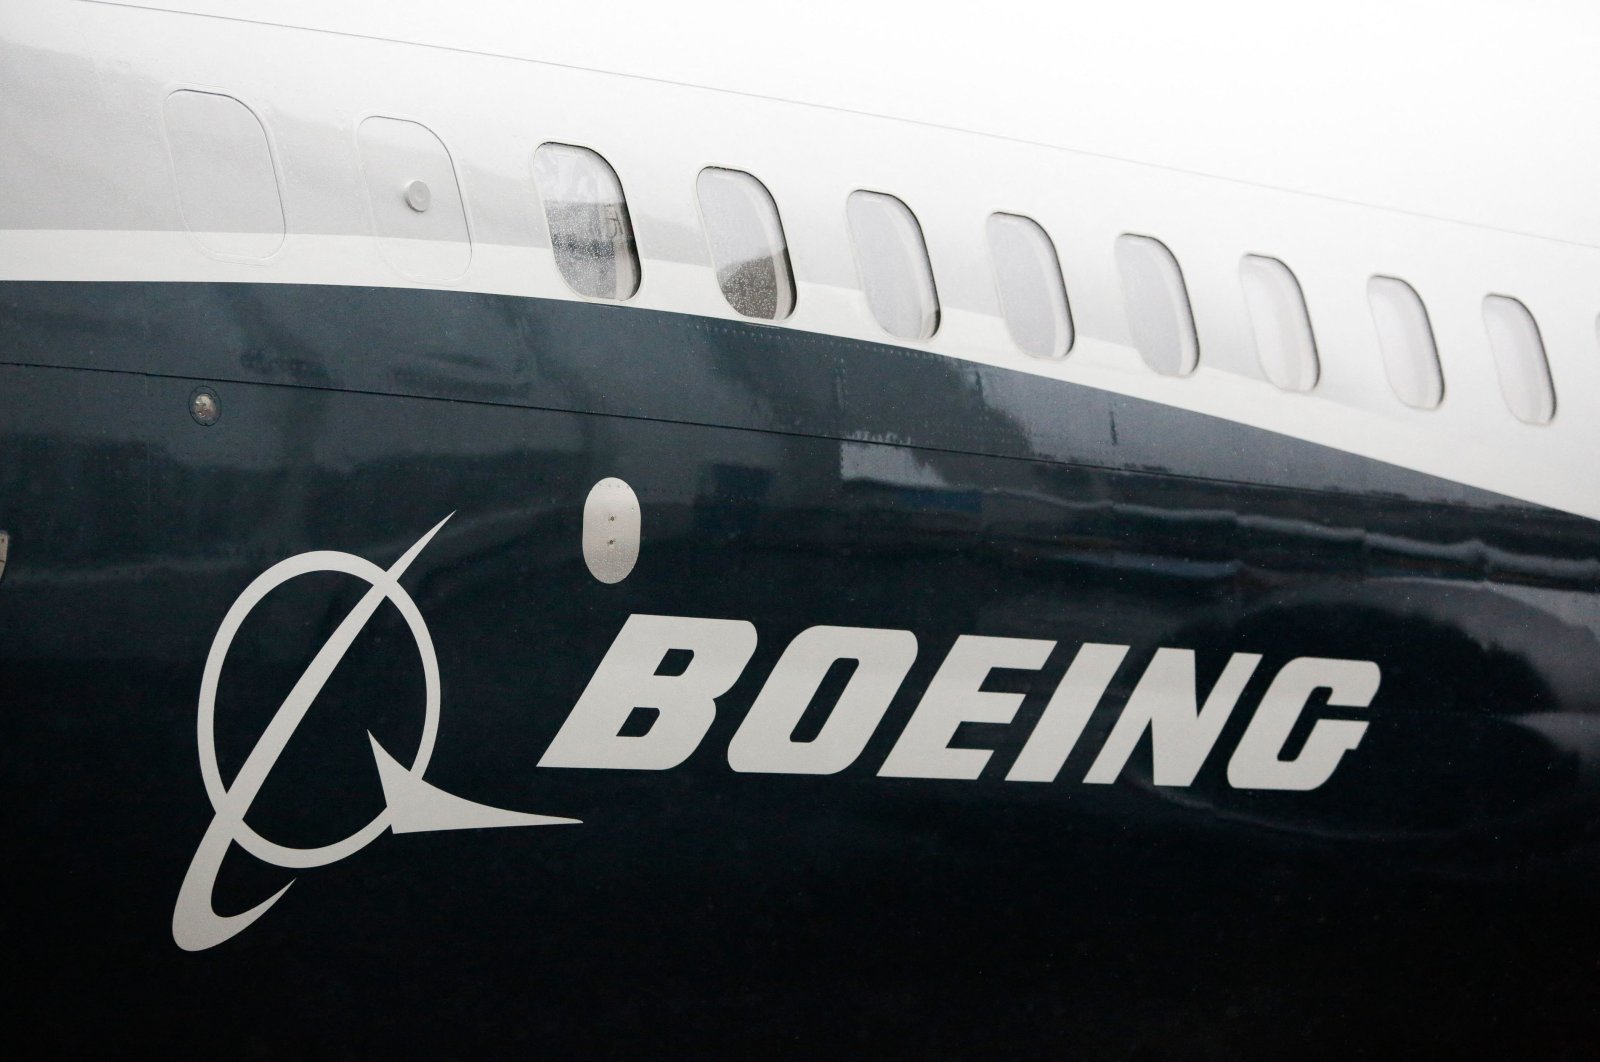  In this file photo the Boeing logo on the first Boeing 737 MAX 9 airplane is pictured during its rollout for media at the Boeing factory in Renton, Washington on March 7, 2017. (AFP Photo)